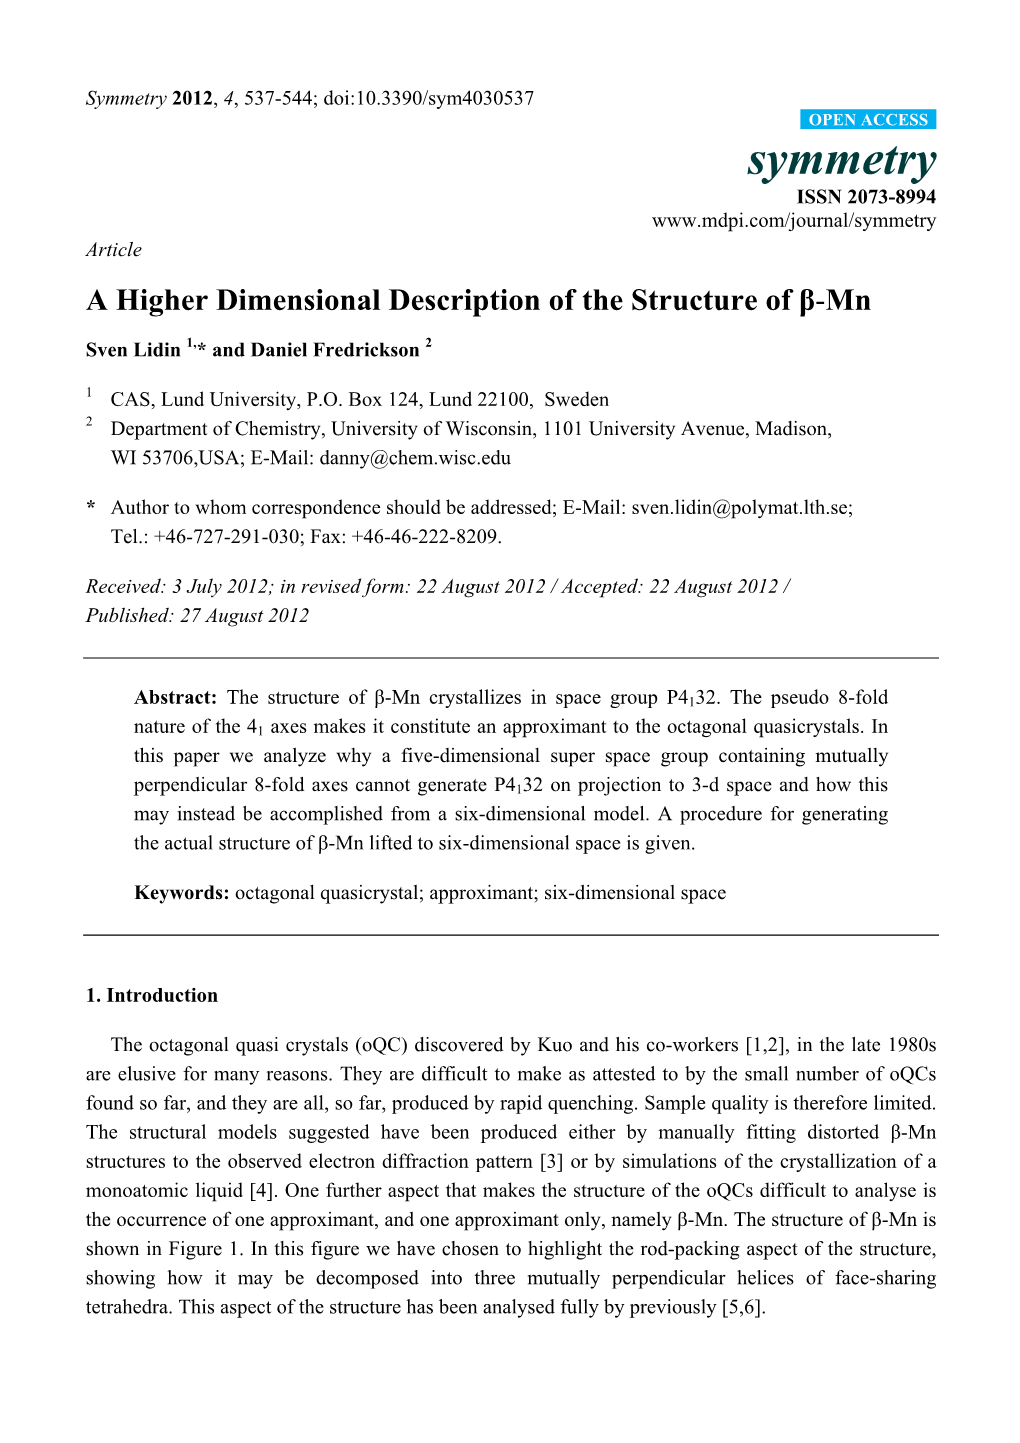 A Higher Dimensional Description of the Structure of Β-Mn